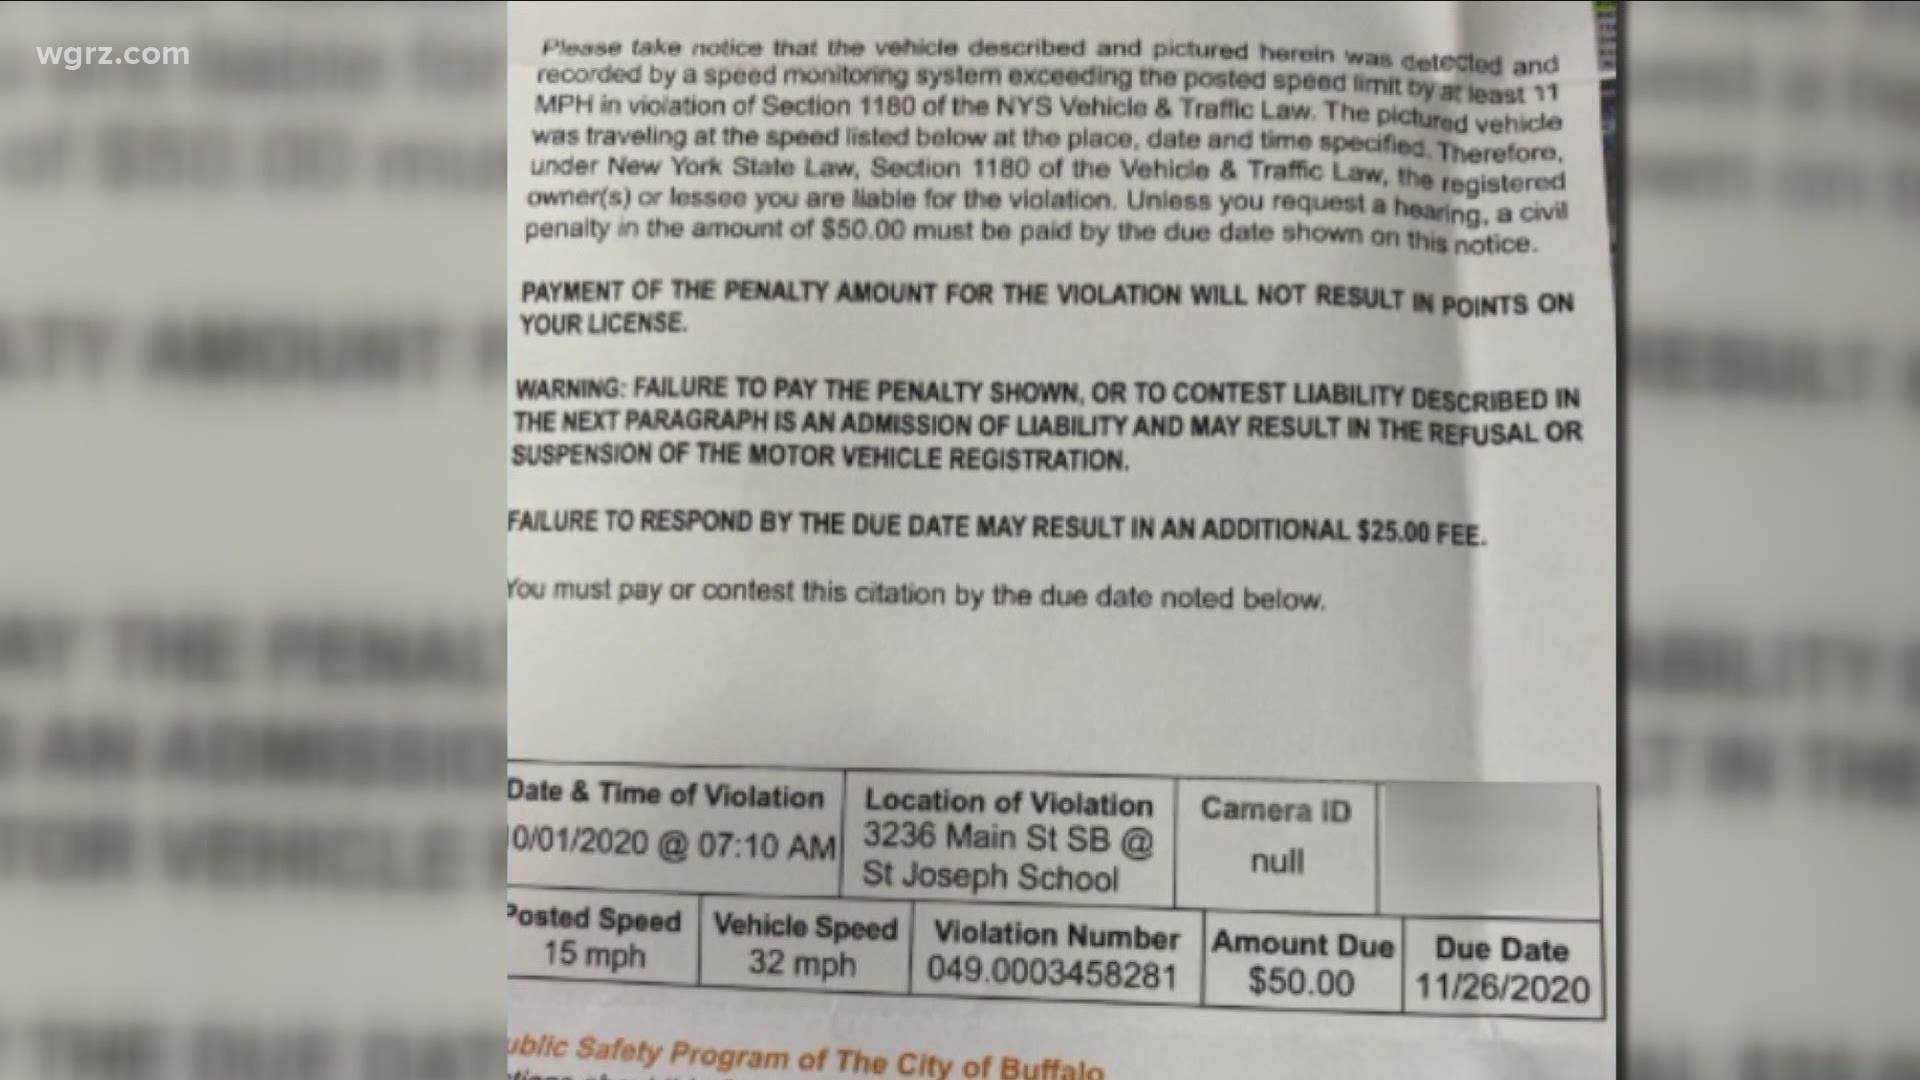 Citation Company S Typographical Error On A Form Used To Contest Buffalo School Zone Citations Leads Some To Sex Fantasy Line Wgrz Com